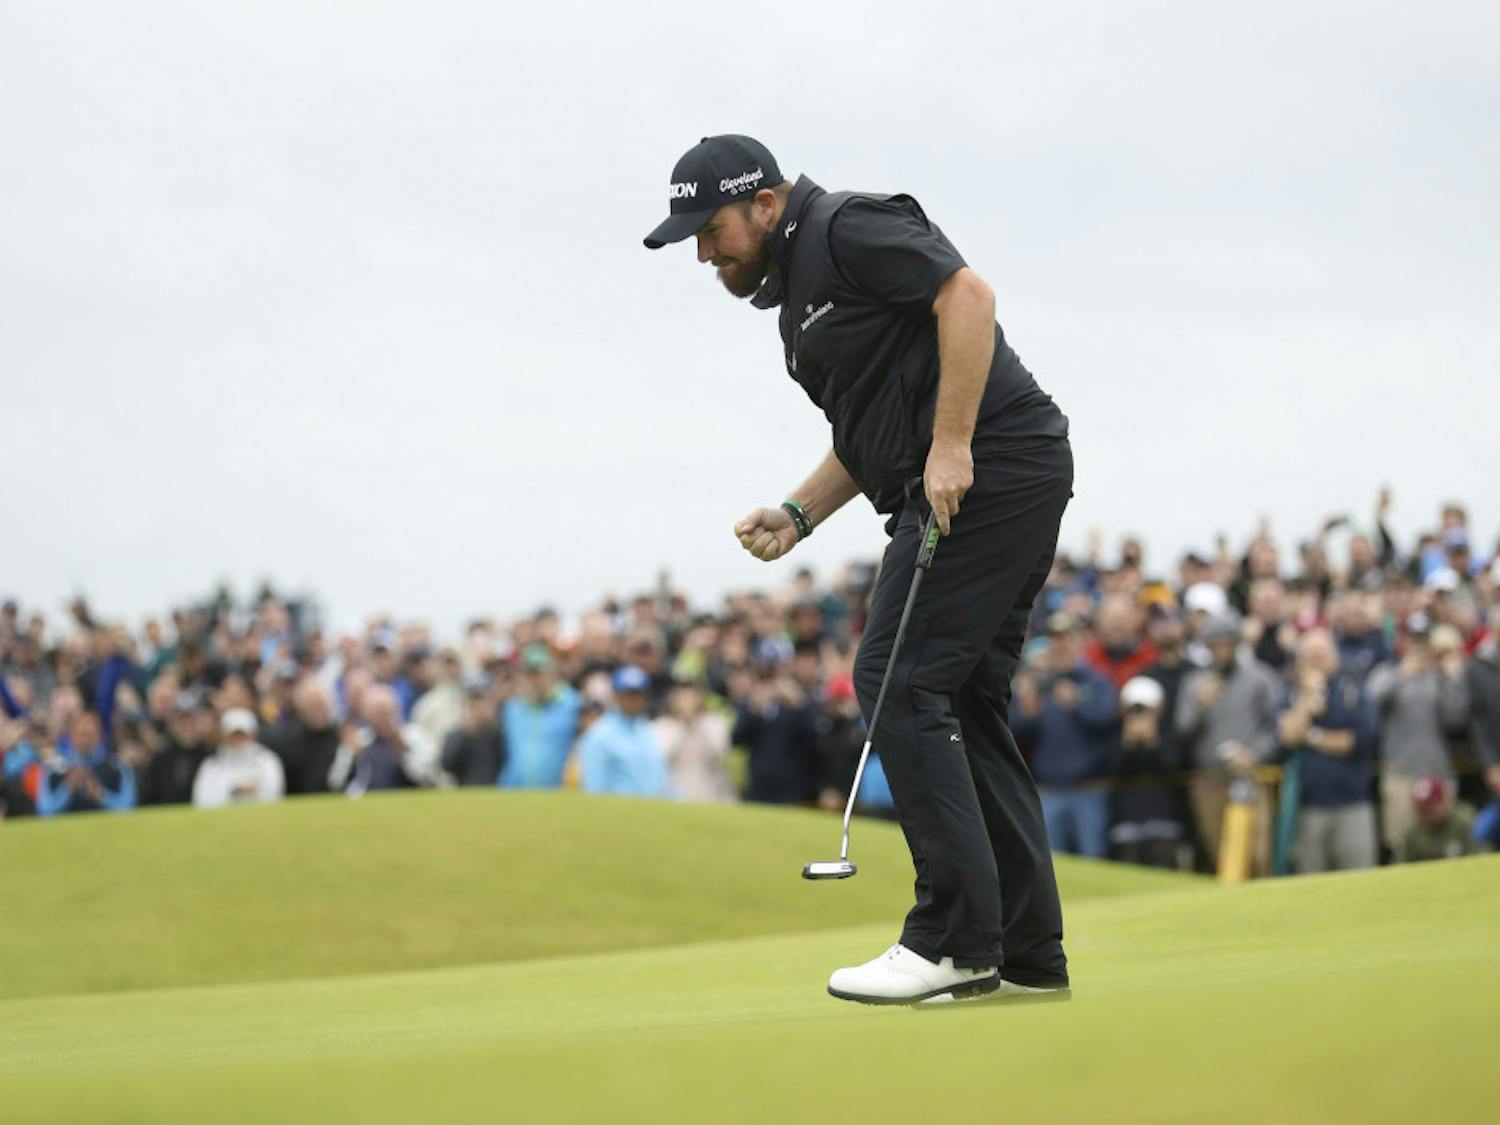 Ireland's Shane Lowry reacts after making a birdie on the 15th green during the final round of the British Open Golf Championships at Royal Portrush in Northern Ireland, Sunday, July 21, 2019.